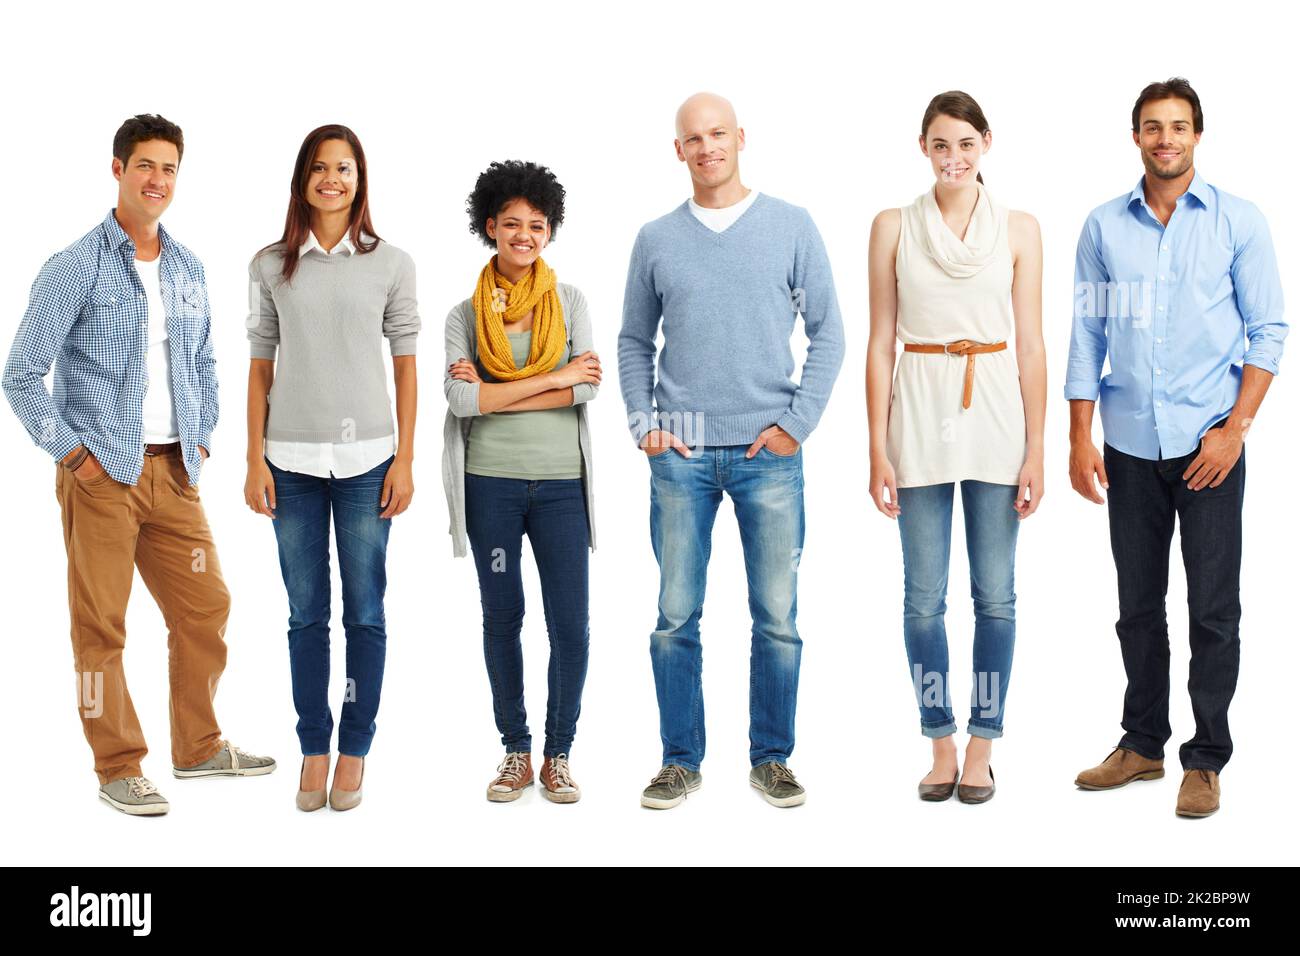 Stylish and casual line-up. Casually dressed group of young adults standing against a white background. Stock Photo